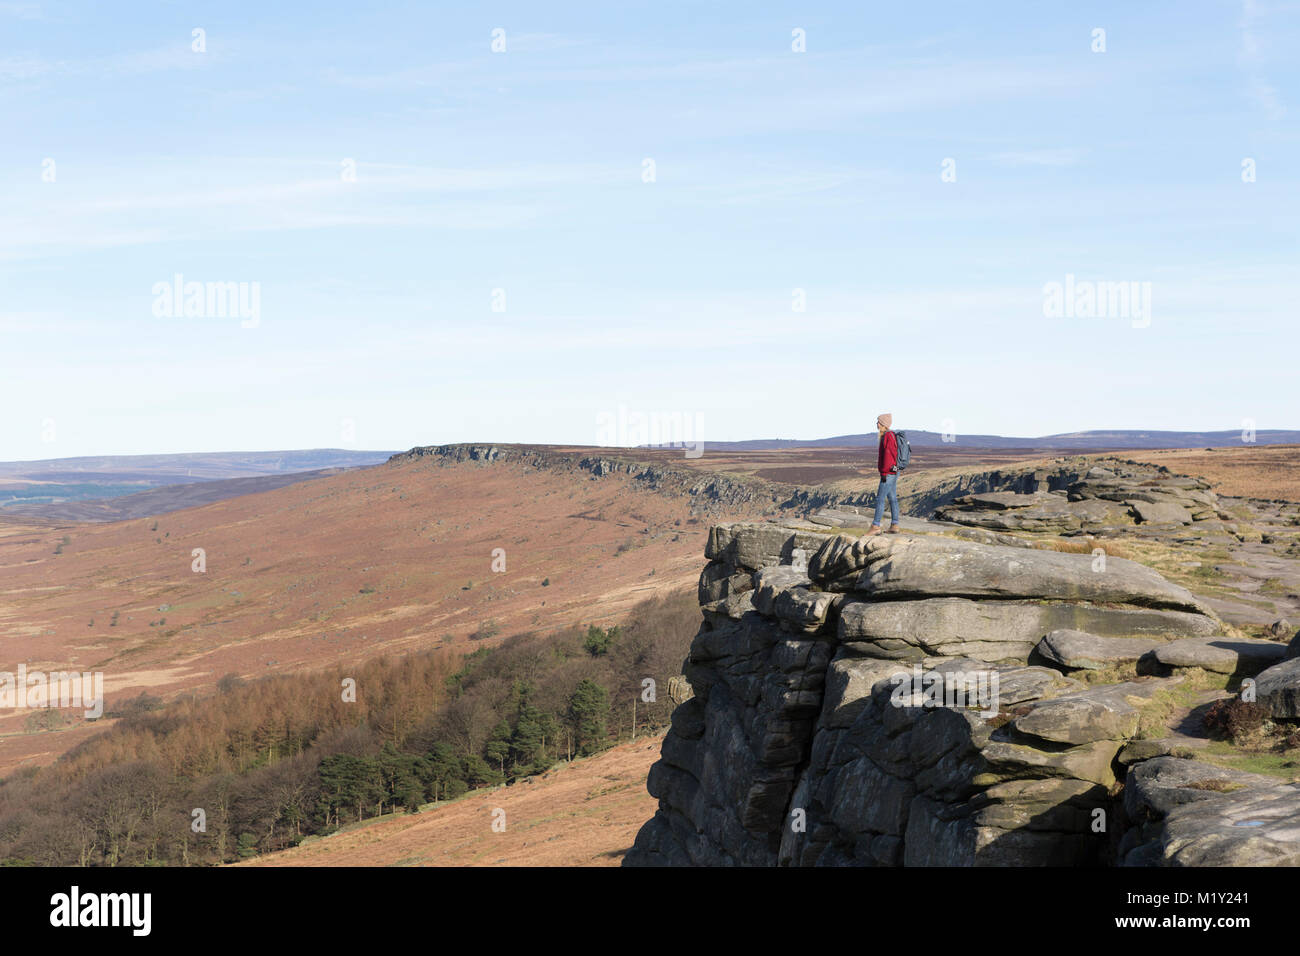 UK, Derbyshire, Peak District Nationa Park, a walker on the cliff edge of Stanage Edge. Stock Photo